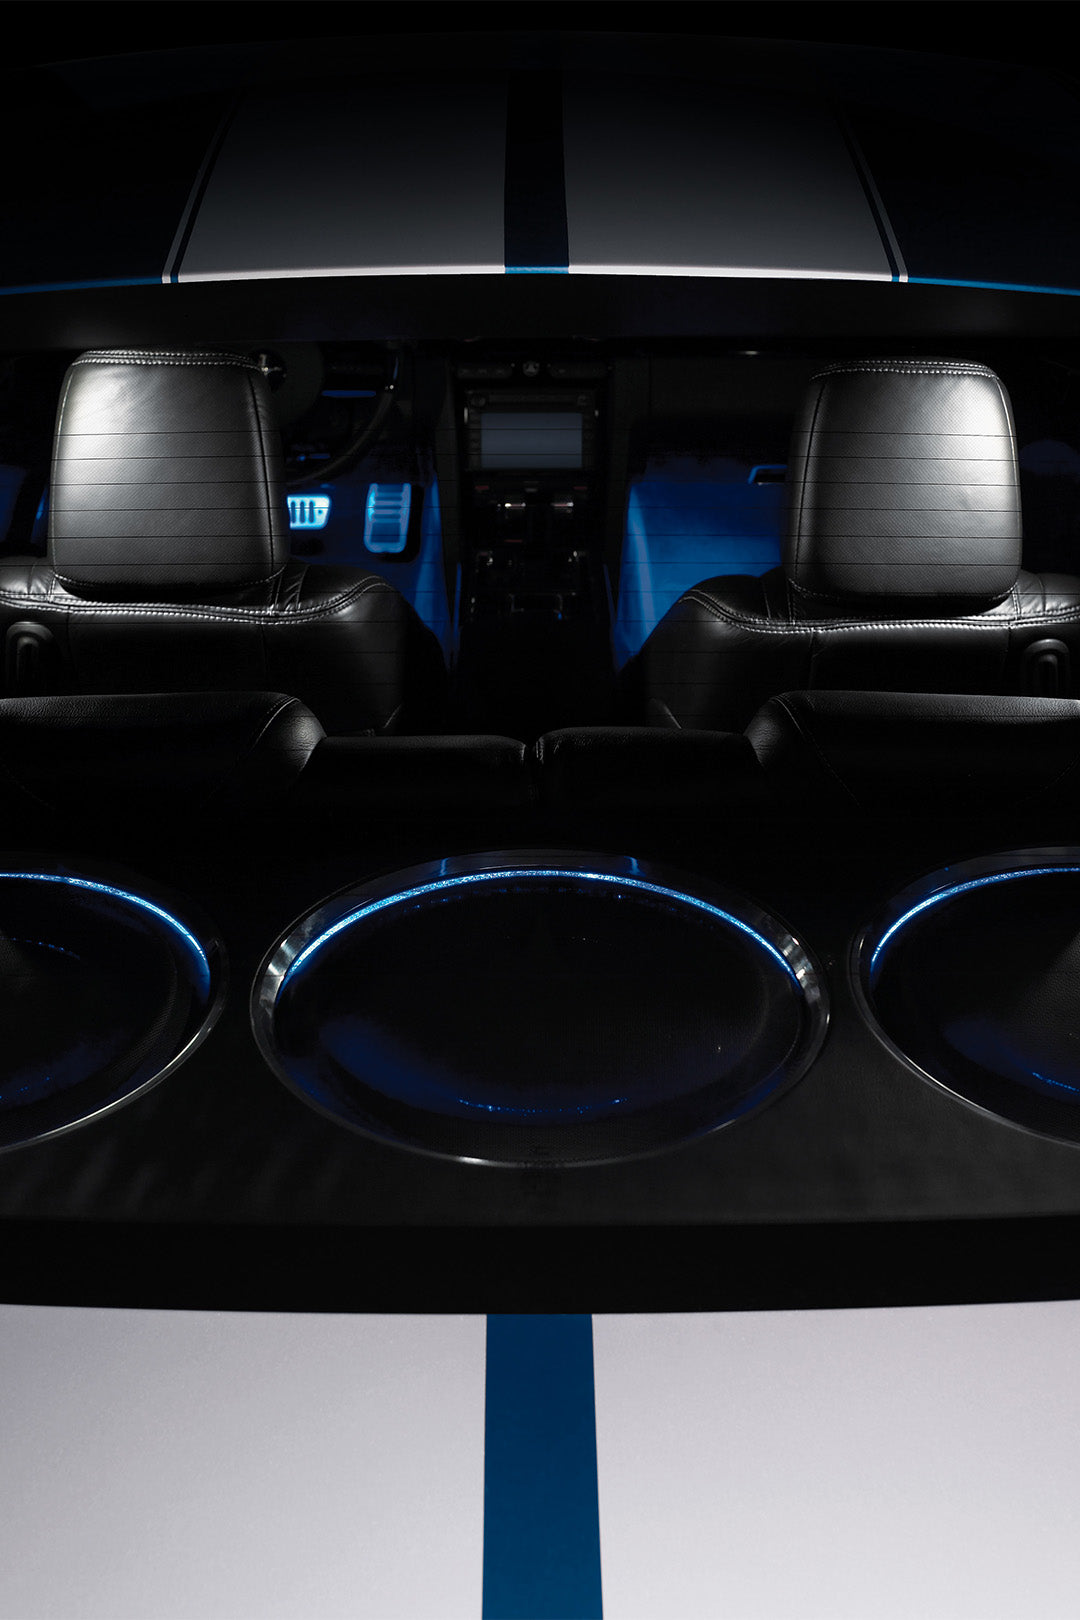 A series of 3 TW5v2 car audio subwoofer units installed in the back of a vehicle.